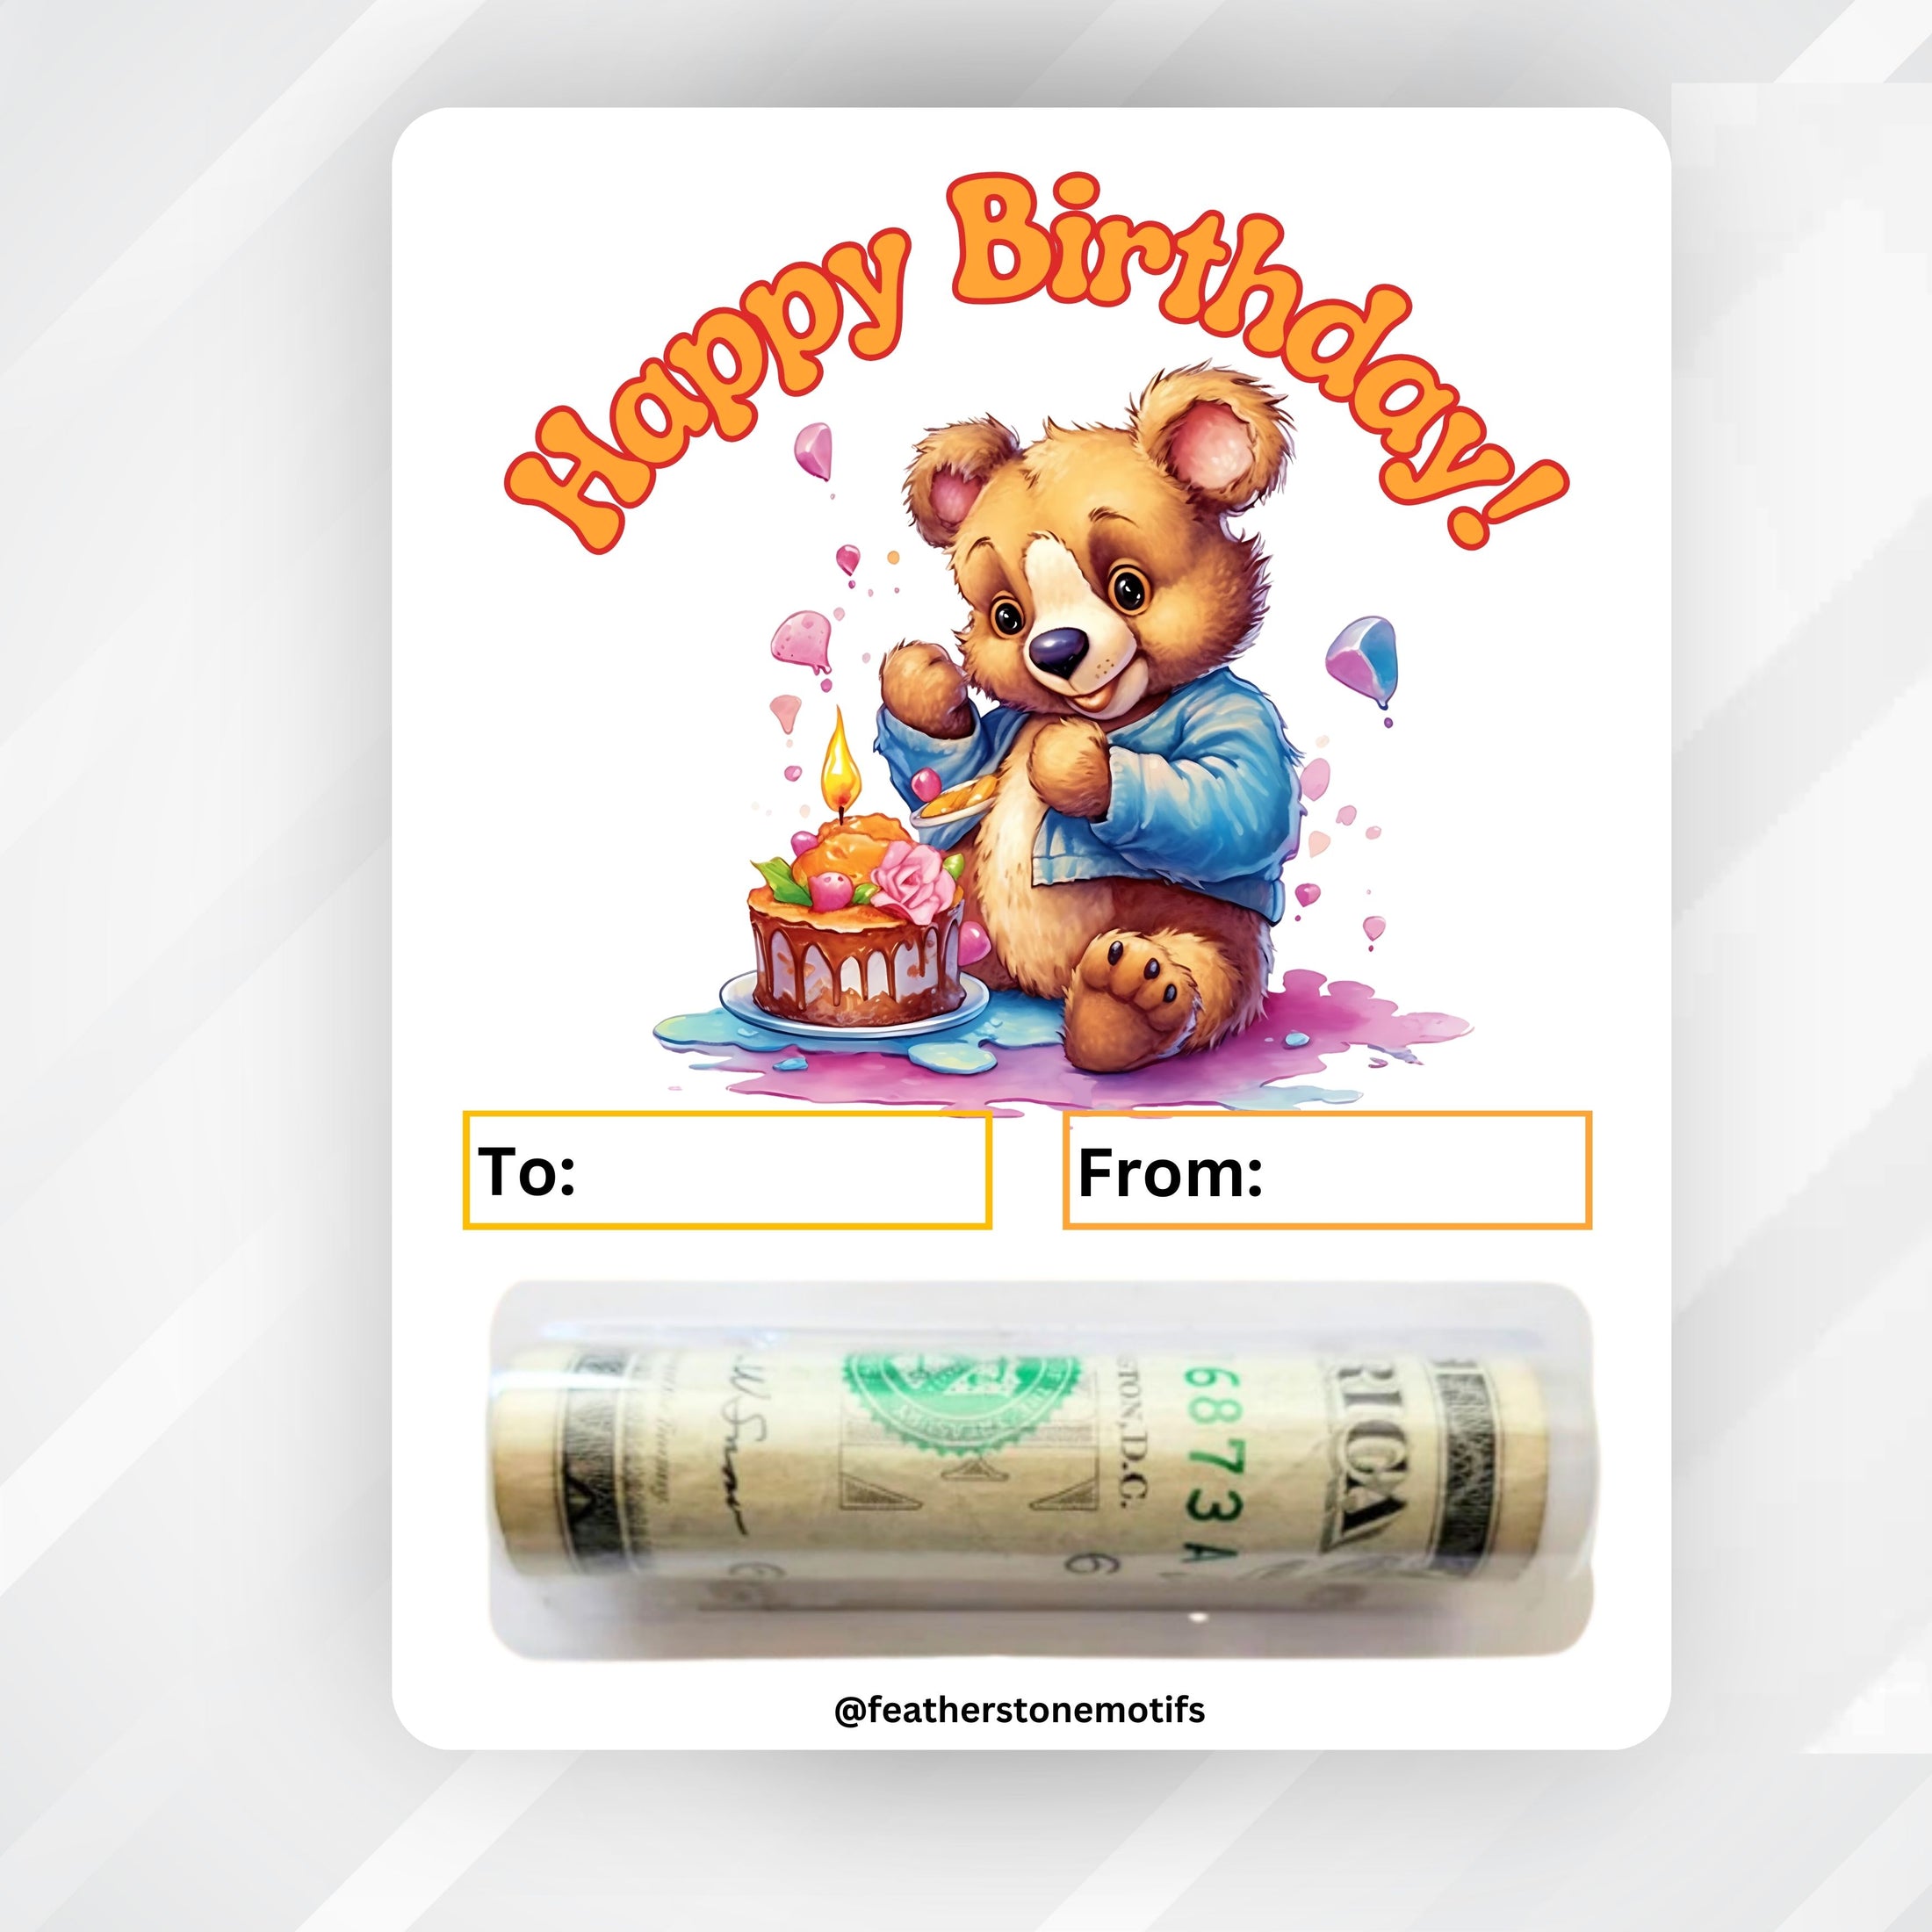 This image show the money tube attached to the Bear Birthday money card.